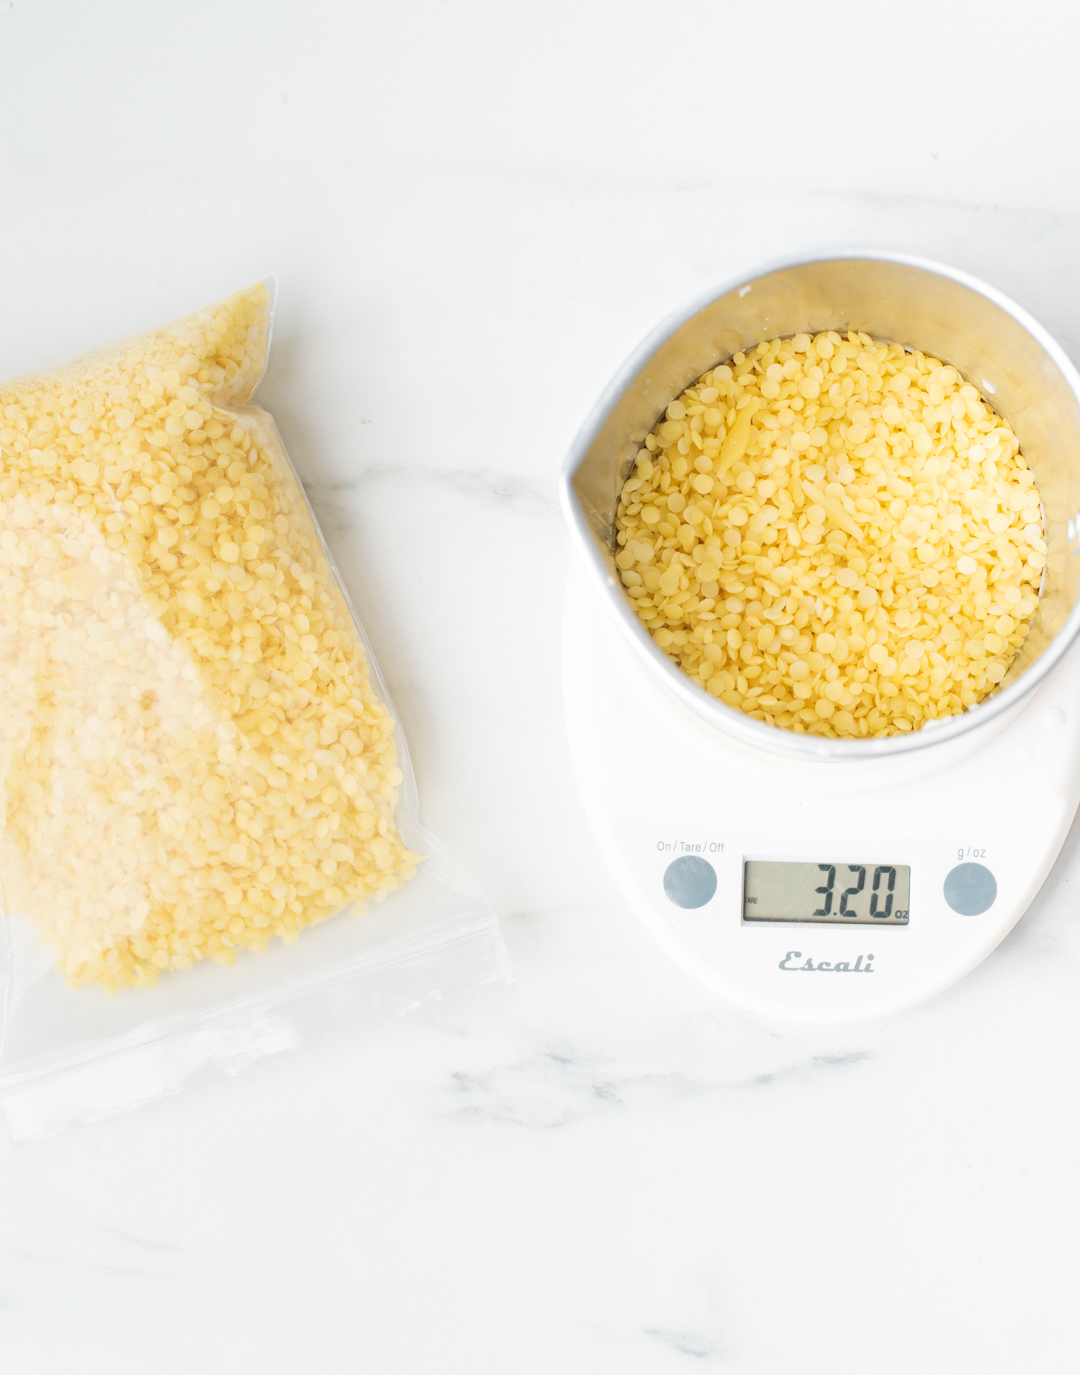 Weighing wax on a digital scale.